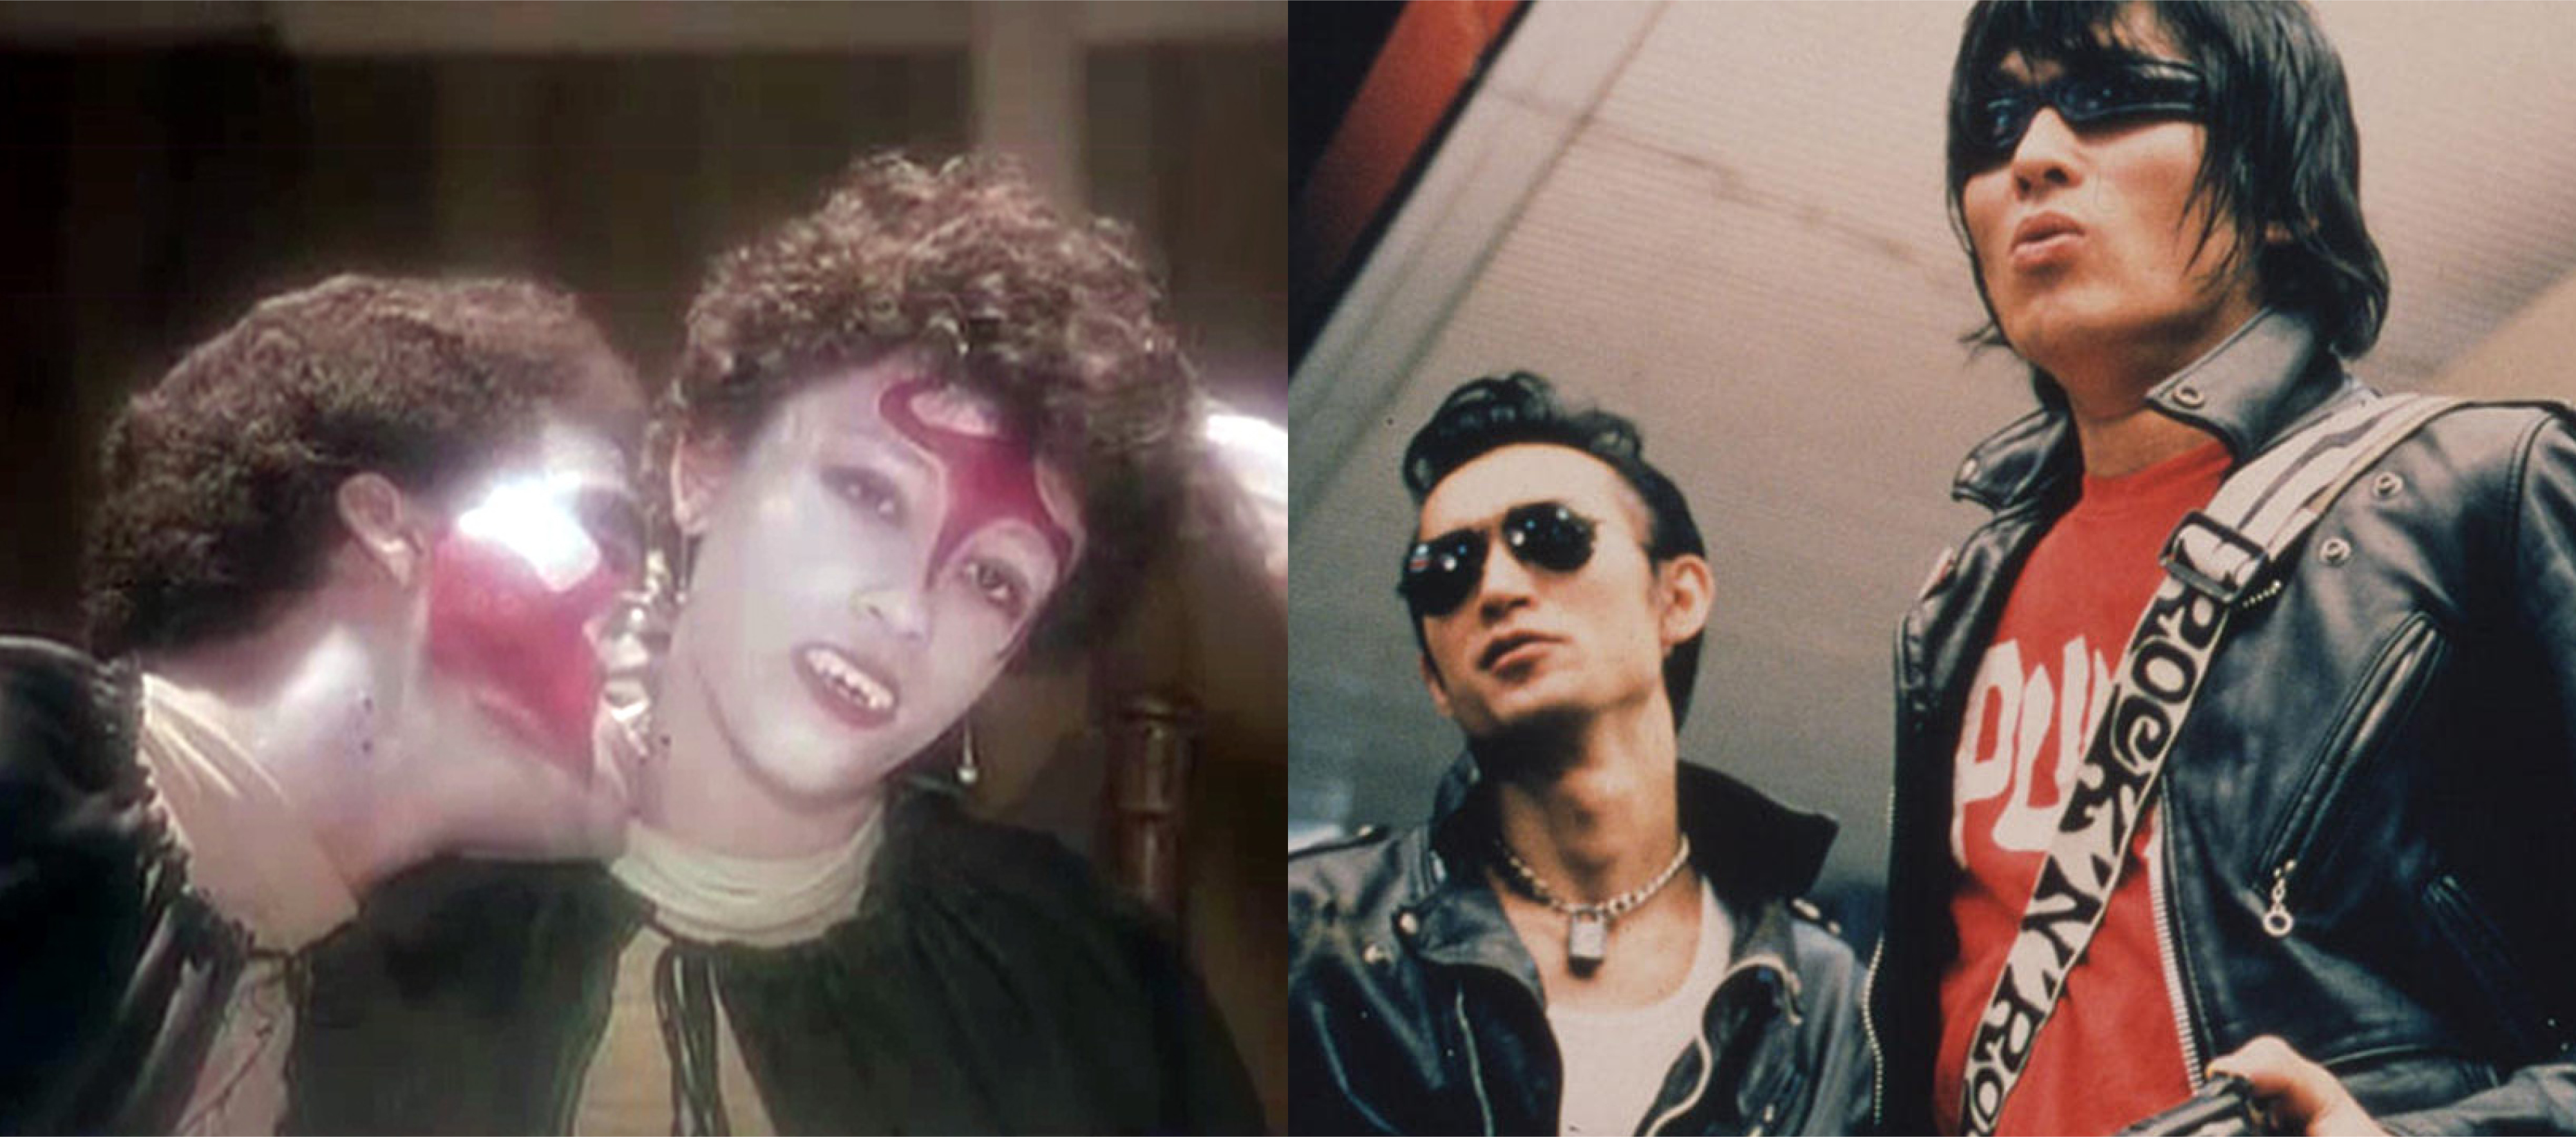 Stills from each Fangs and Wild Zero; one vampire bites another and two Ramones-style punk rockers.